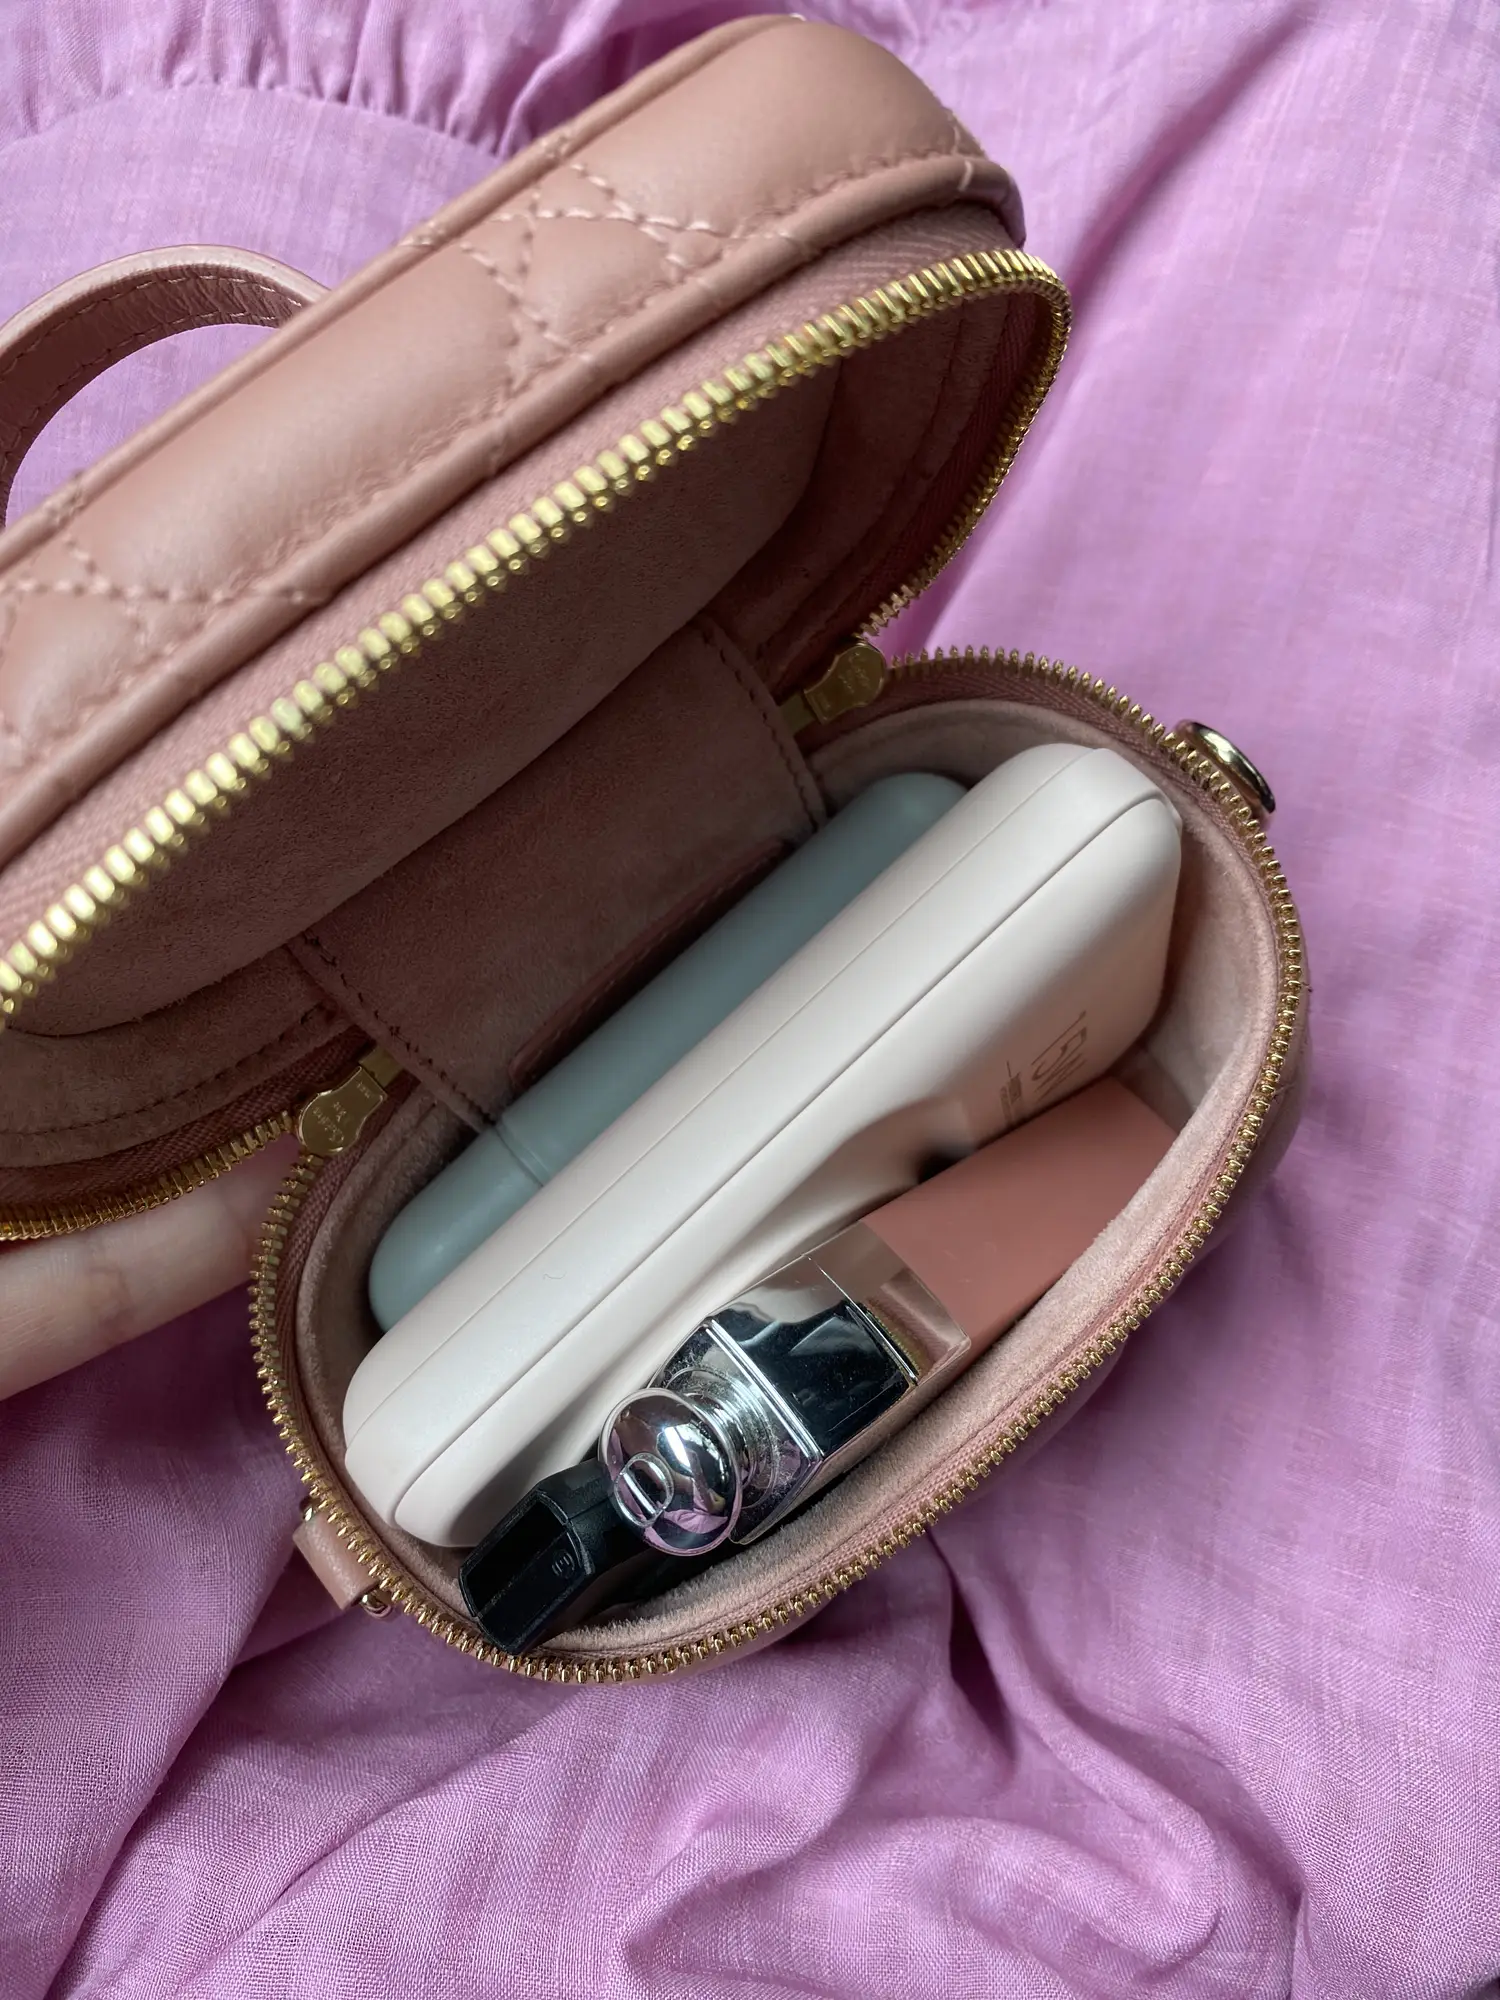 Dior Micro Vanity Bag - What actually fits?👀